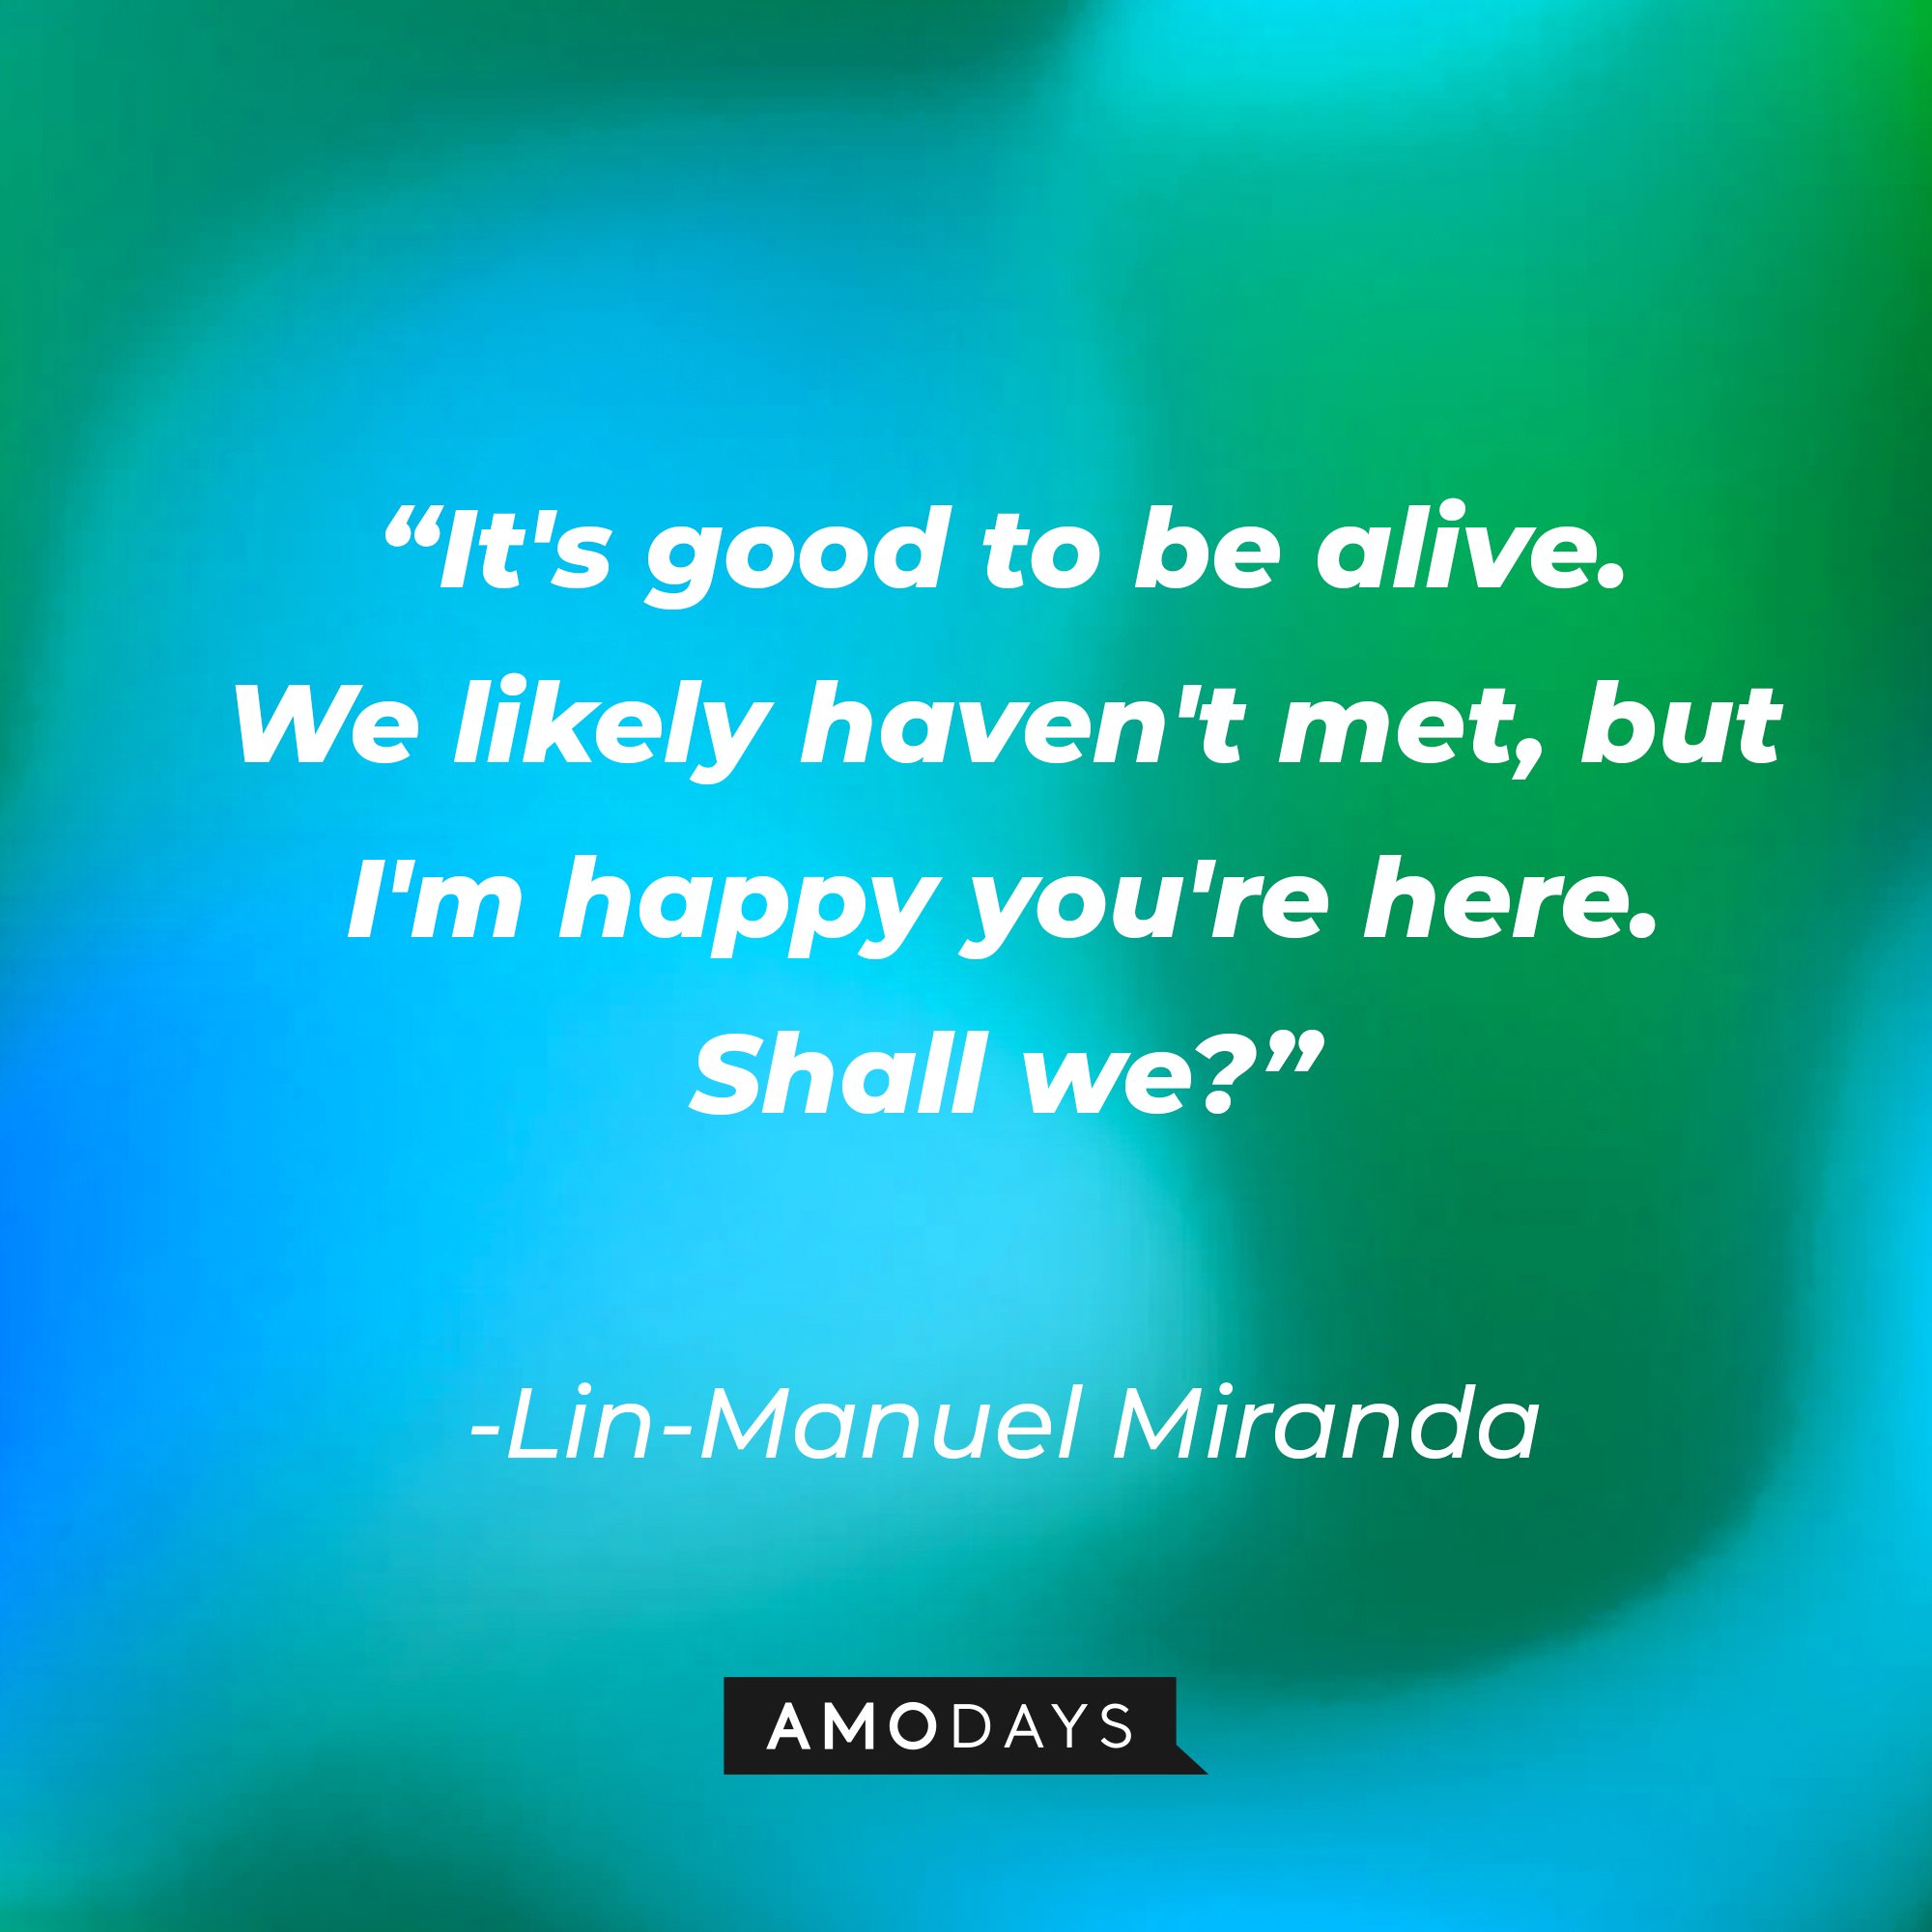 Lin-Manuel Miranda's quote: "It's good to be alive. / We likely haven't met, but I'm happy you're here. / Shall we?" | Image: AmoDays